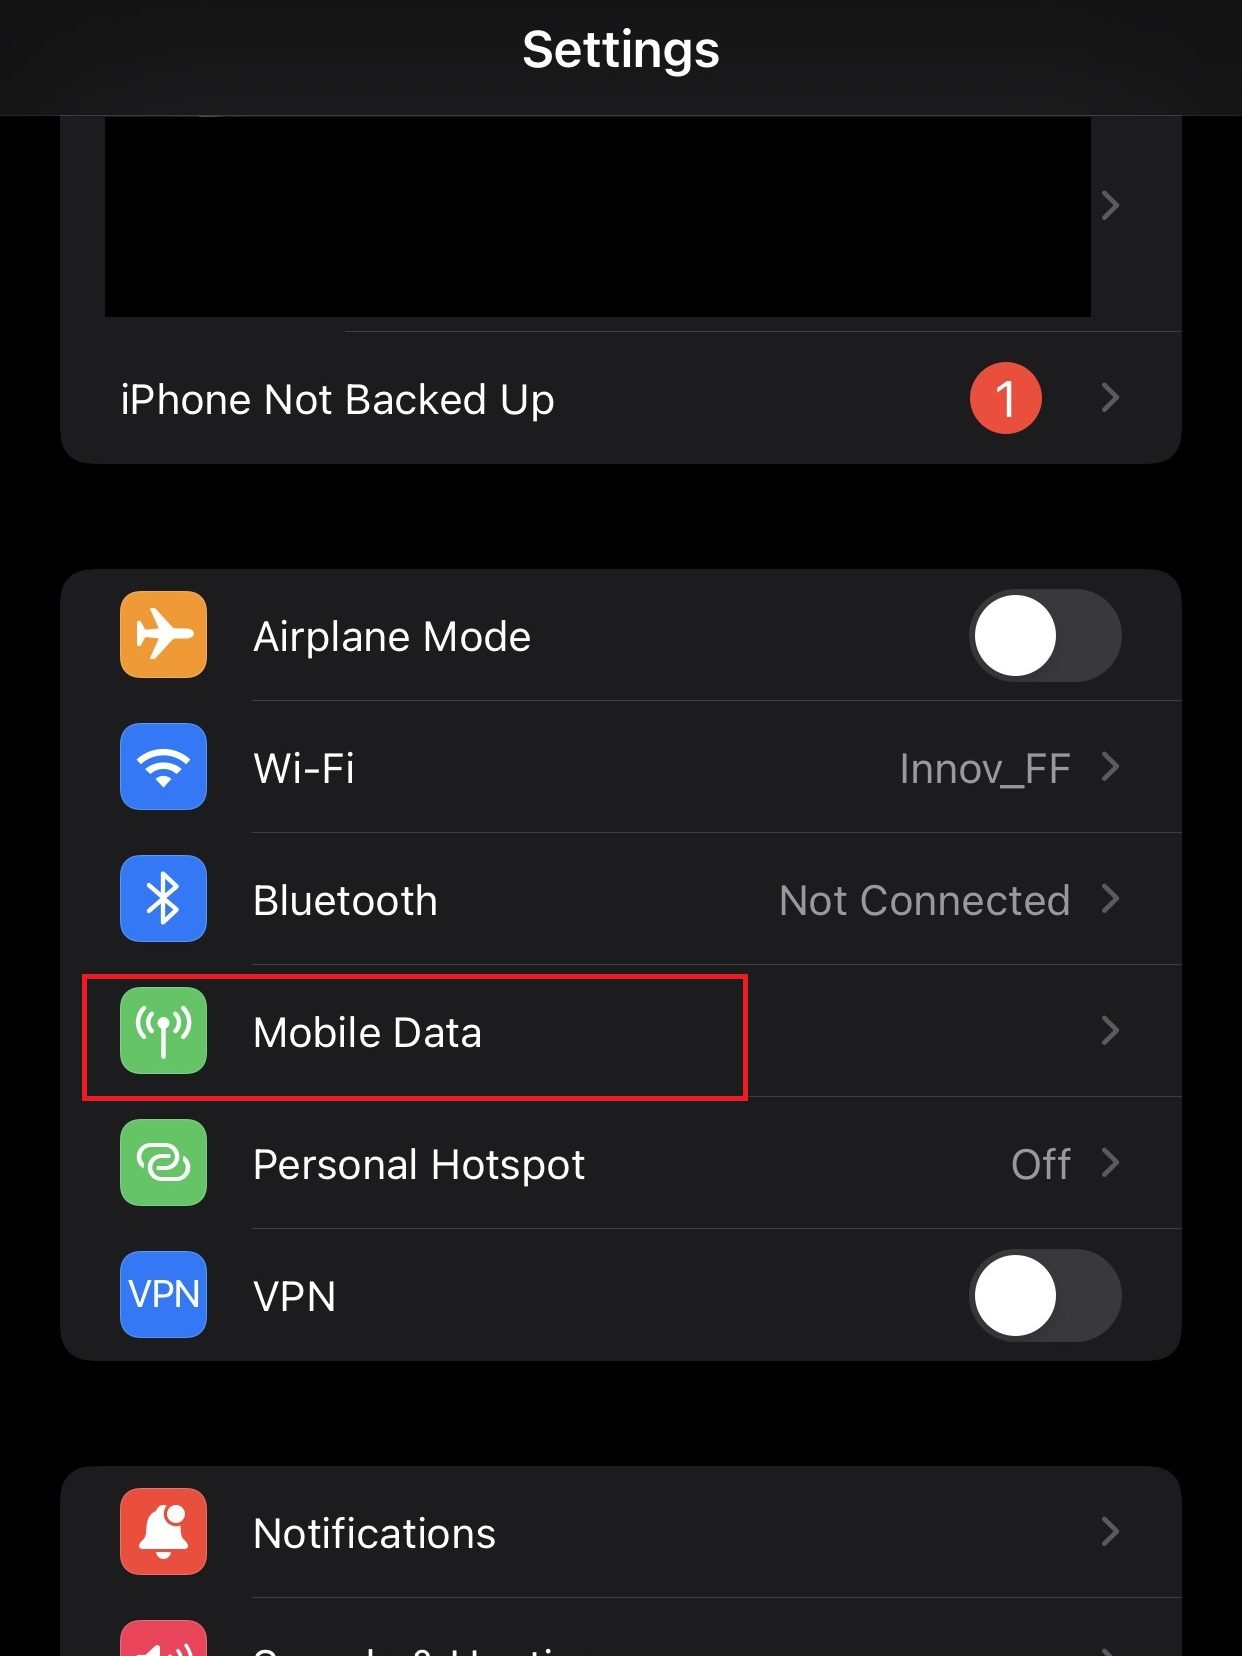 Select Mobile Data to activate eSIM card on iOS devices